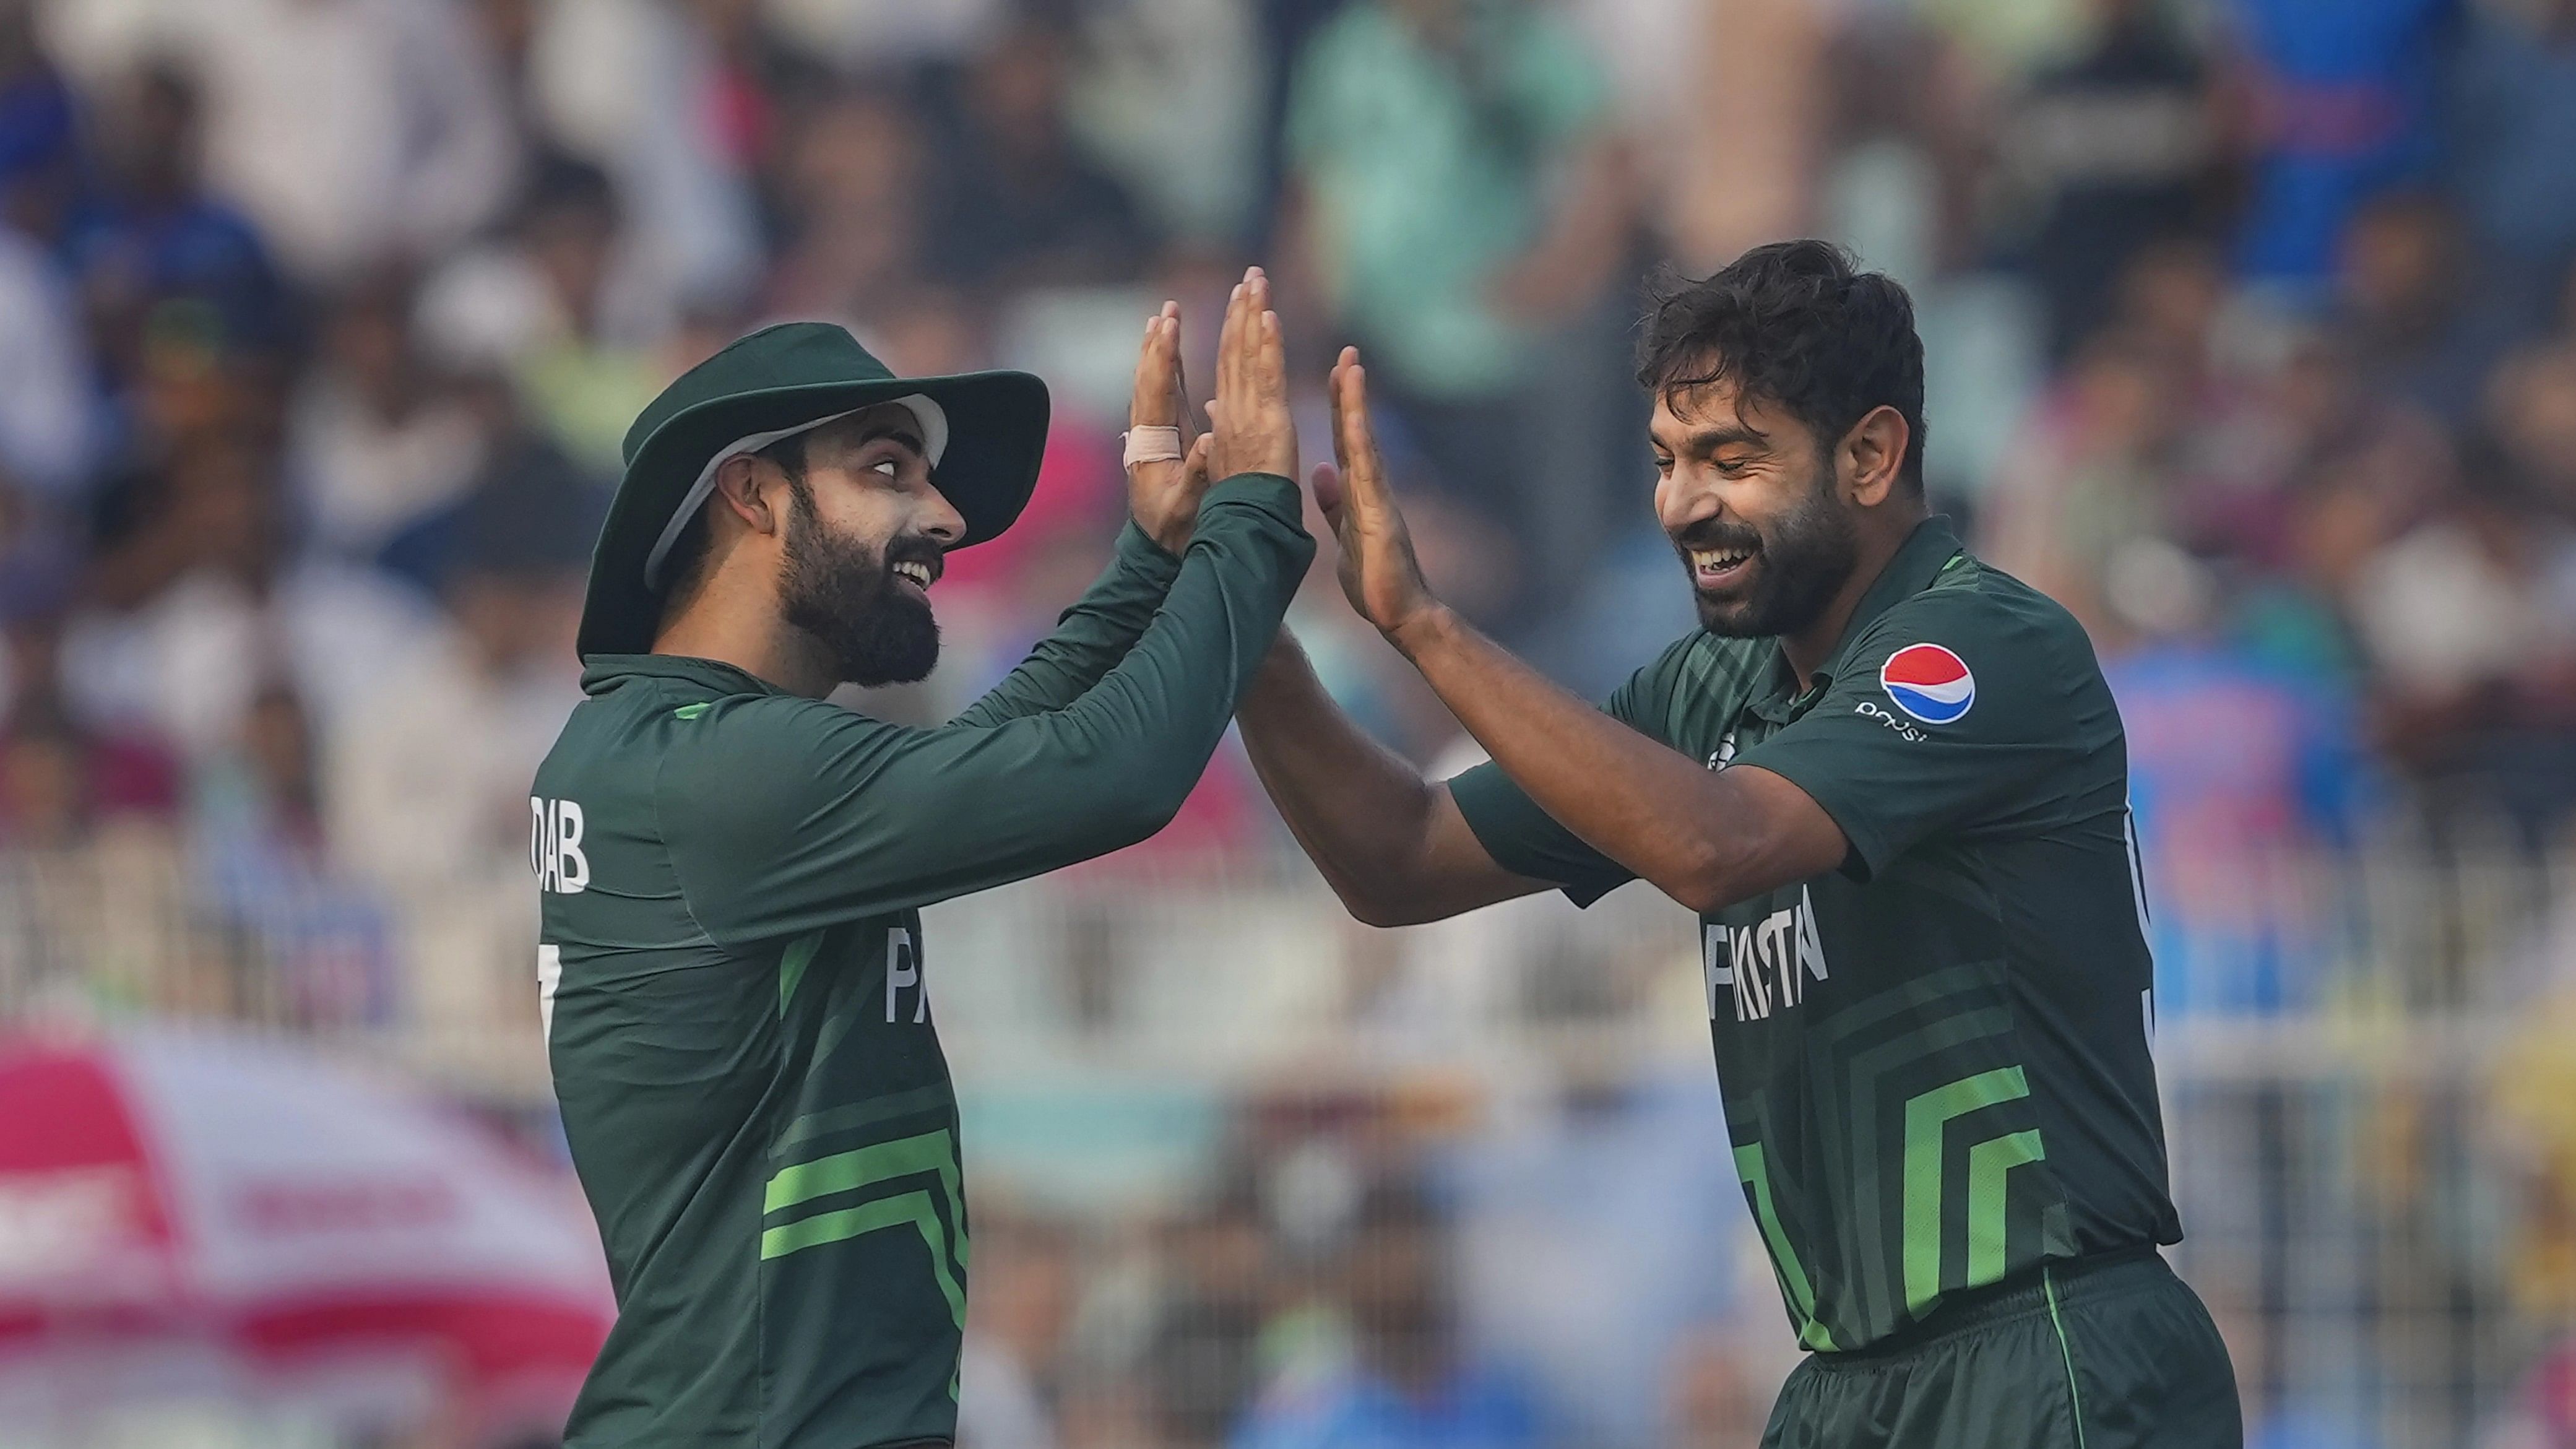 <div class="paragraphs"><p>Pakistan's bowler Haris Rauf celebrates the wicket of England's batter Jonny Bairstow during the ICC Men's Cricket World Cup 2023 match between England and Pakistan, at the Eden Gardens in Kolkata.</p></div>